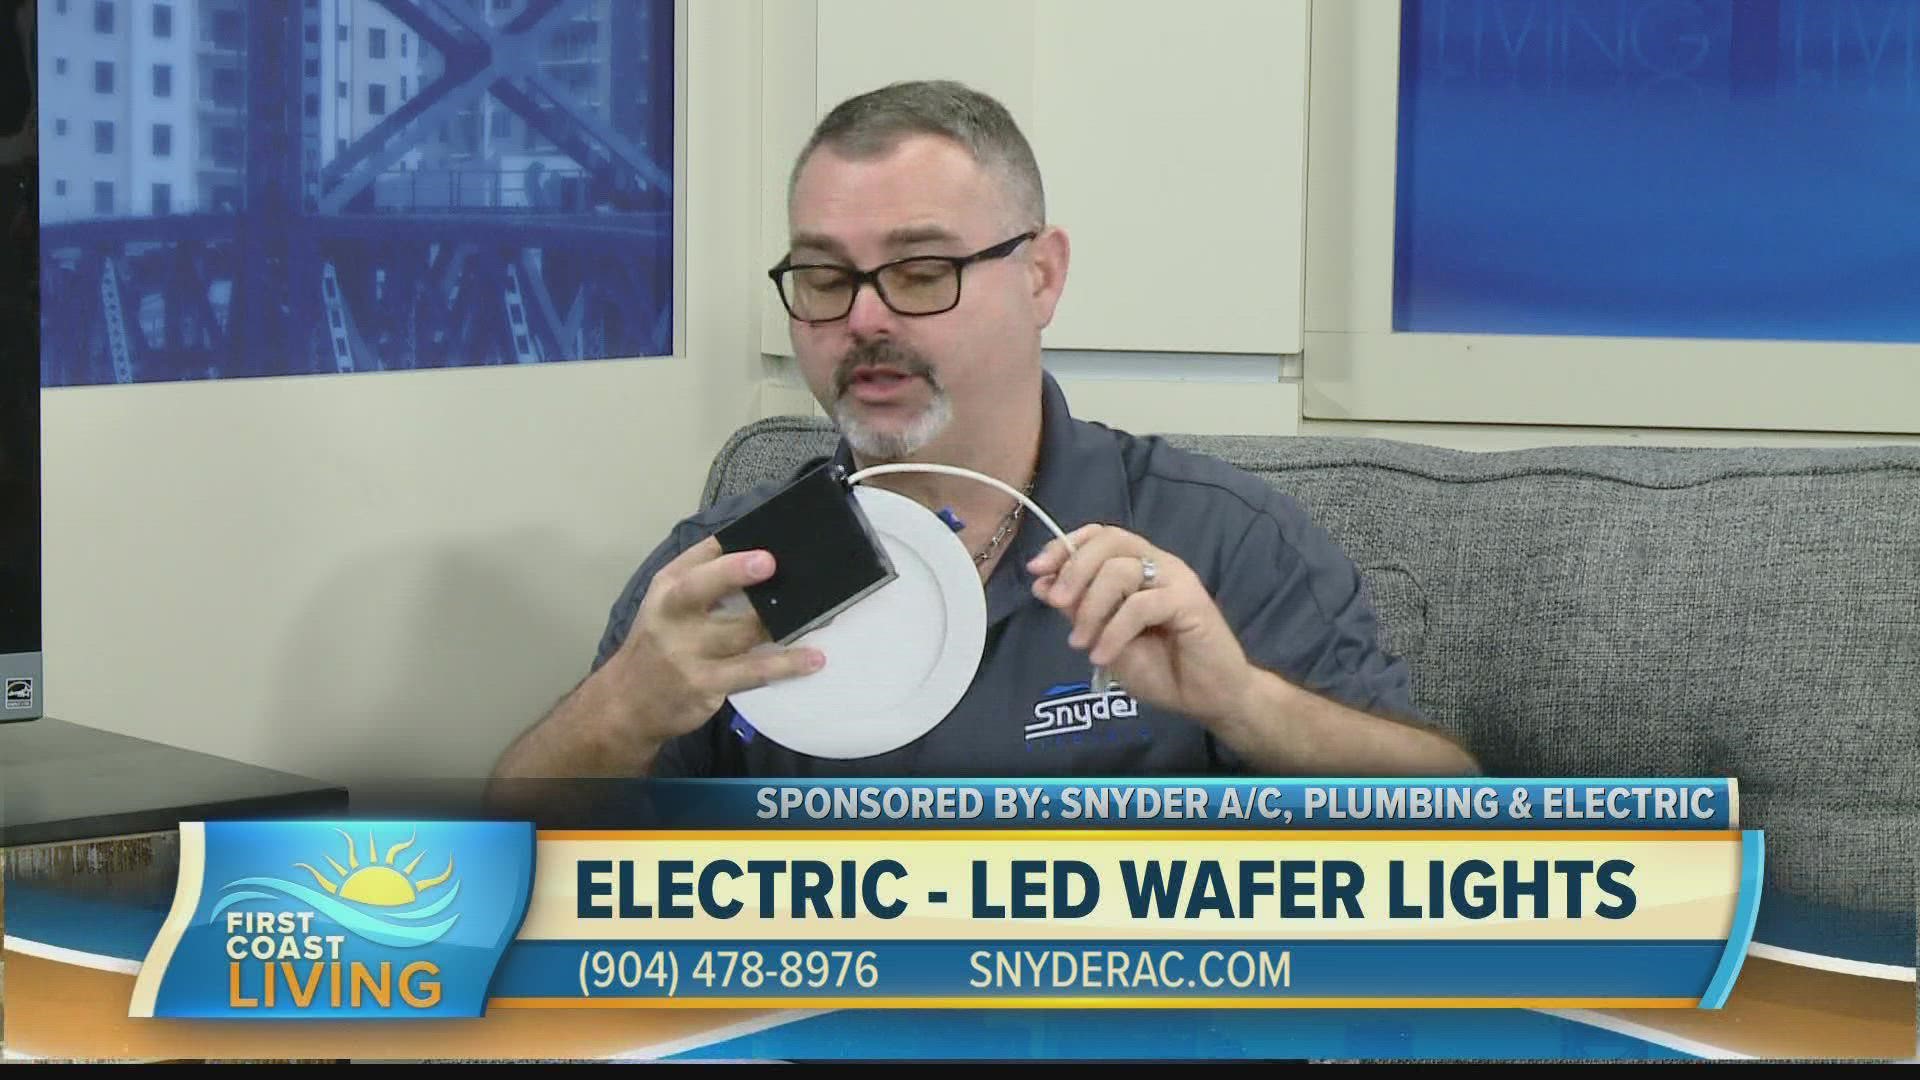 Electrical Service Manager at Snyder AC, Jimmy Humphries discusses the difference between can lights and wafer lights.